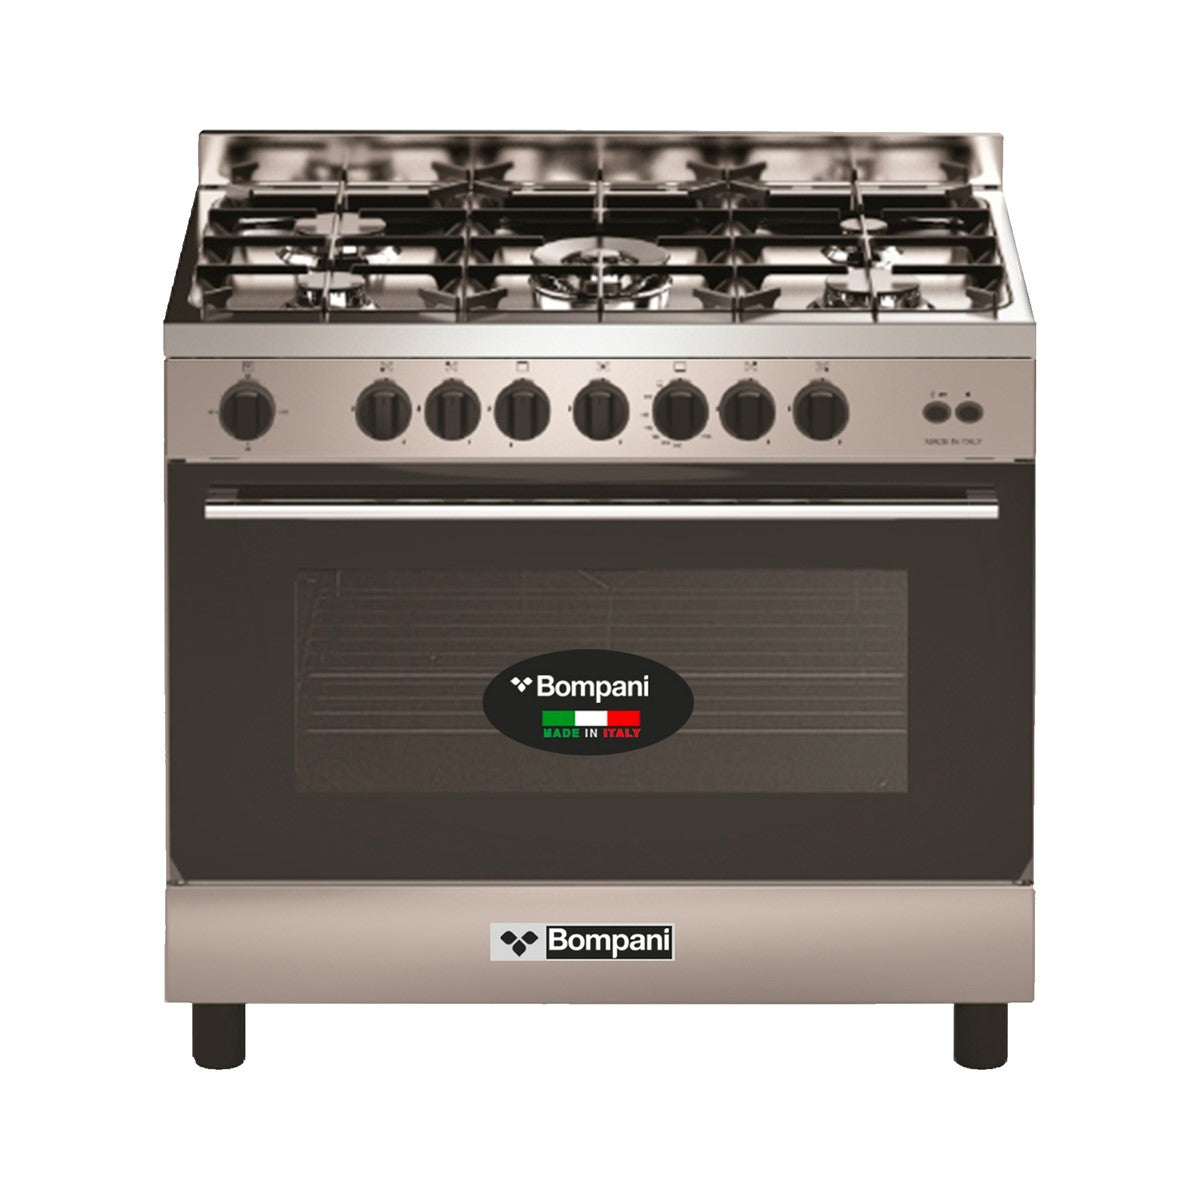 Bompani 5 Gas Burner 90x60cm Cooker with Full Gas Option Oven - BO693ND/L